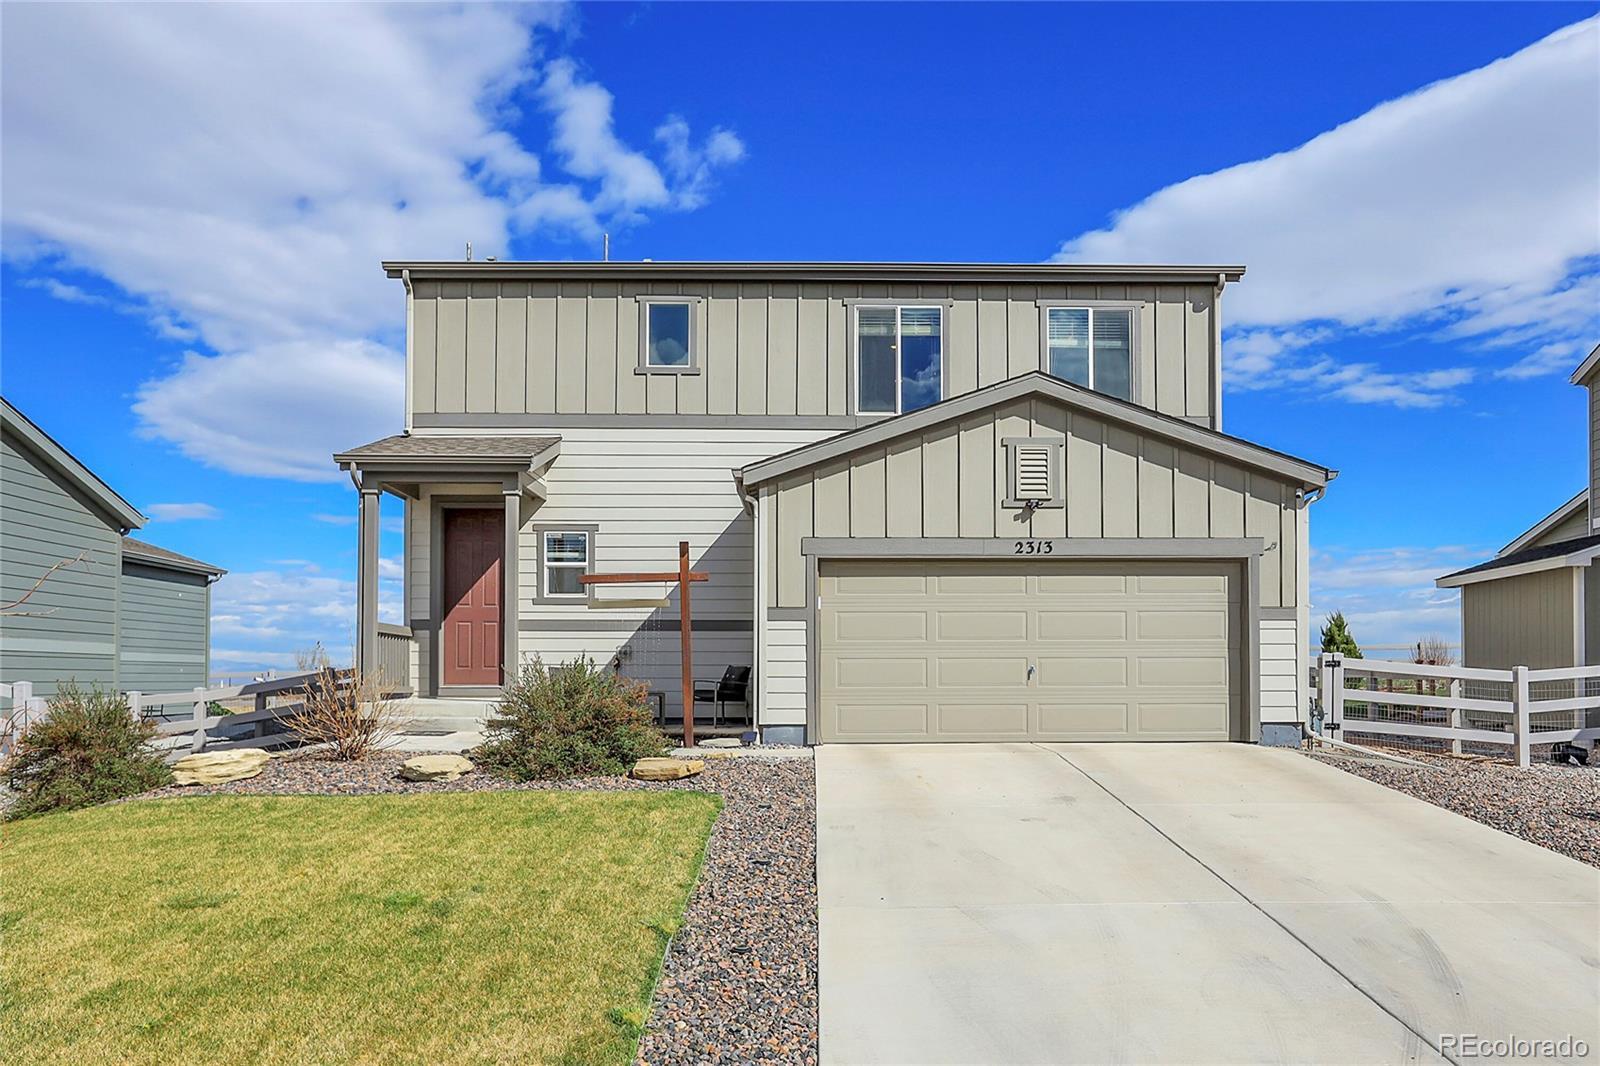 Photo one of 2313 Saddle Back Ct Fort Lupton CO 80621 | MLS 4348089